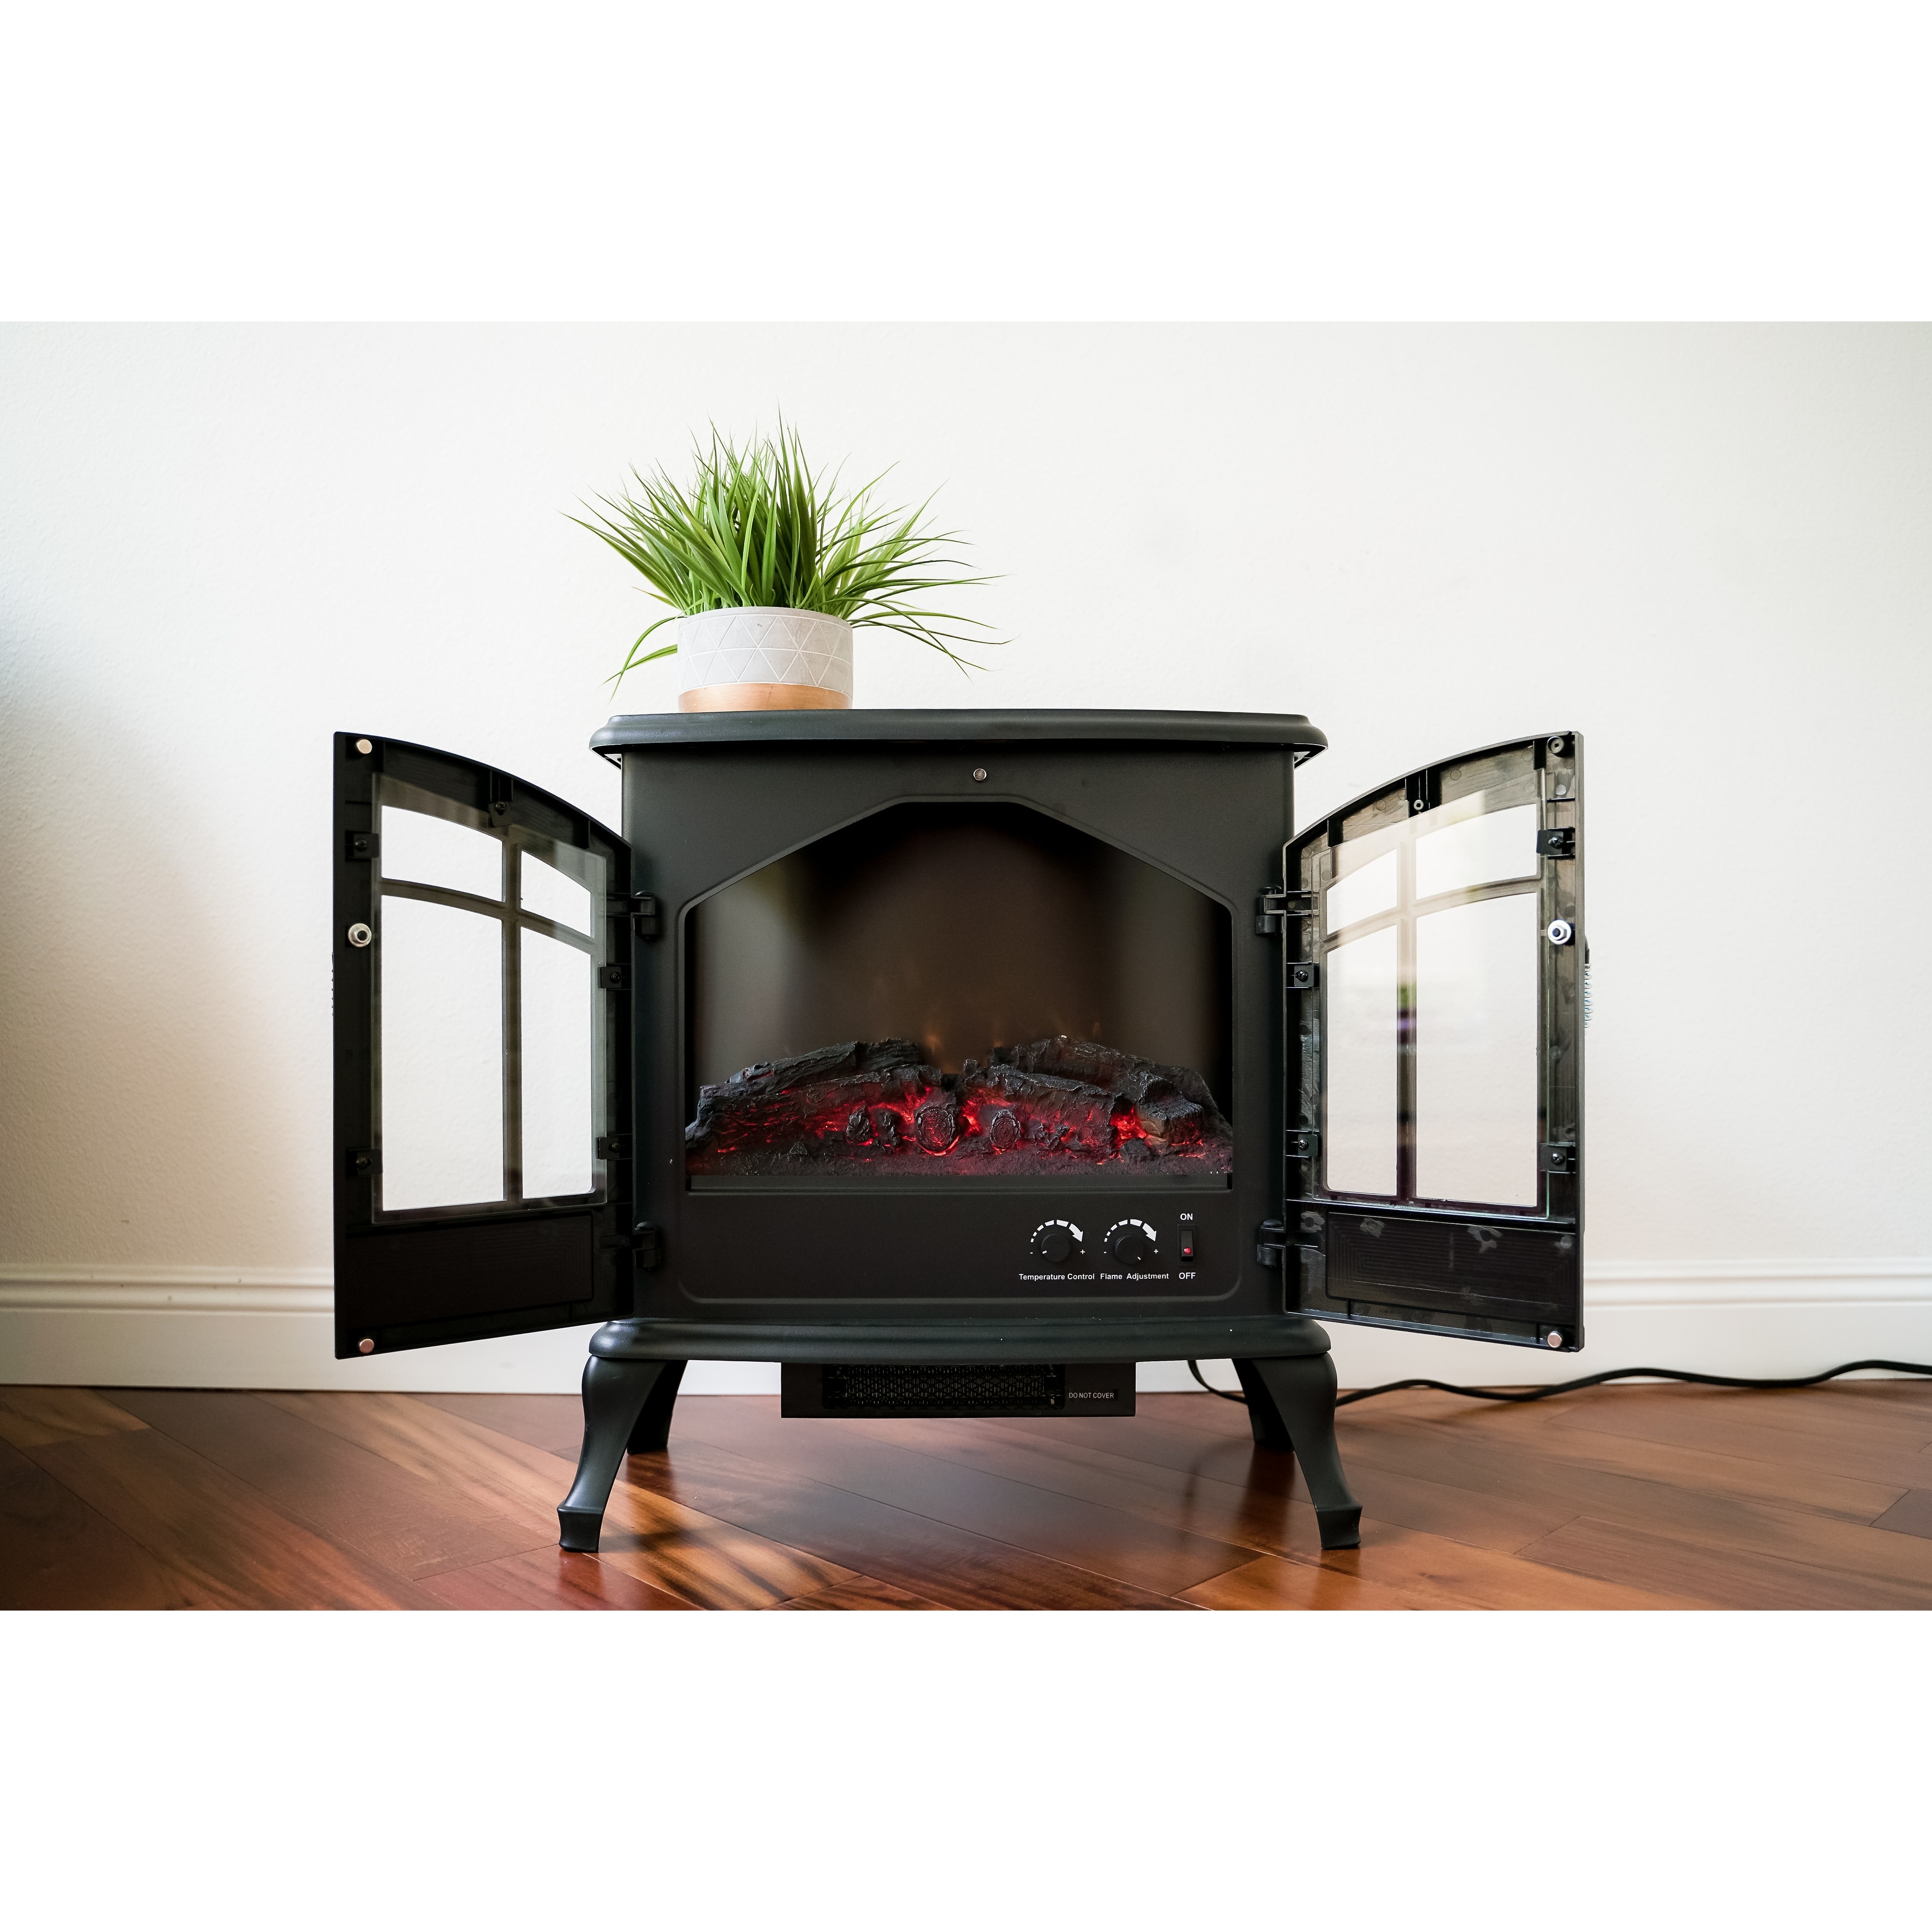 XBrand Electric Fireplace Stove, Indoor Portable Heater, Light Bulb Flame  Effect, Temperature Control, 600W/1500W, 24.7